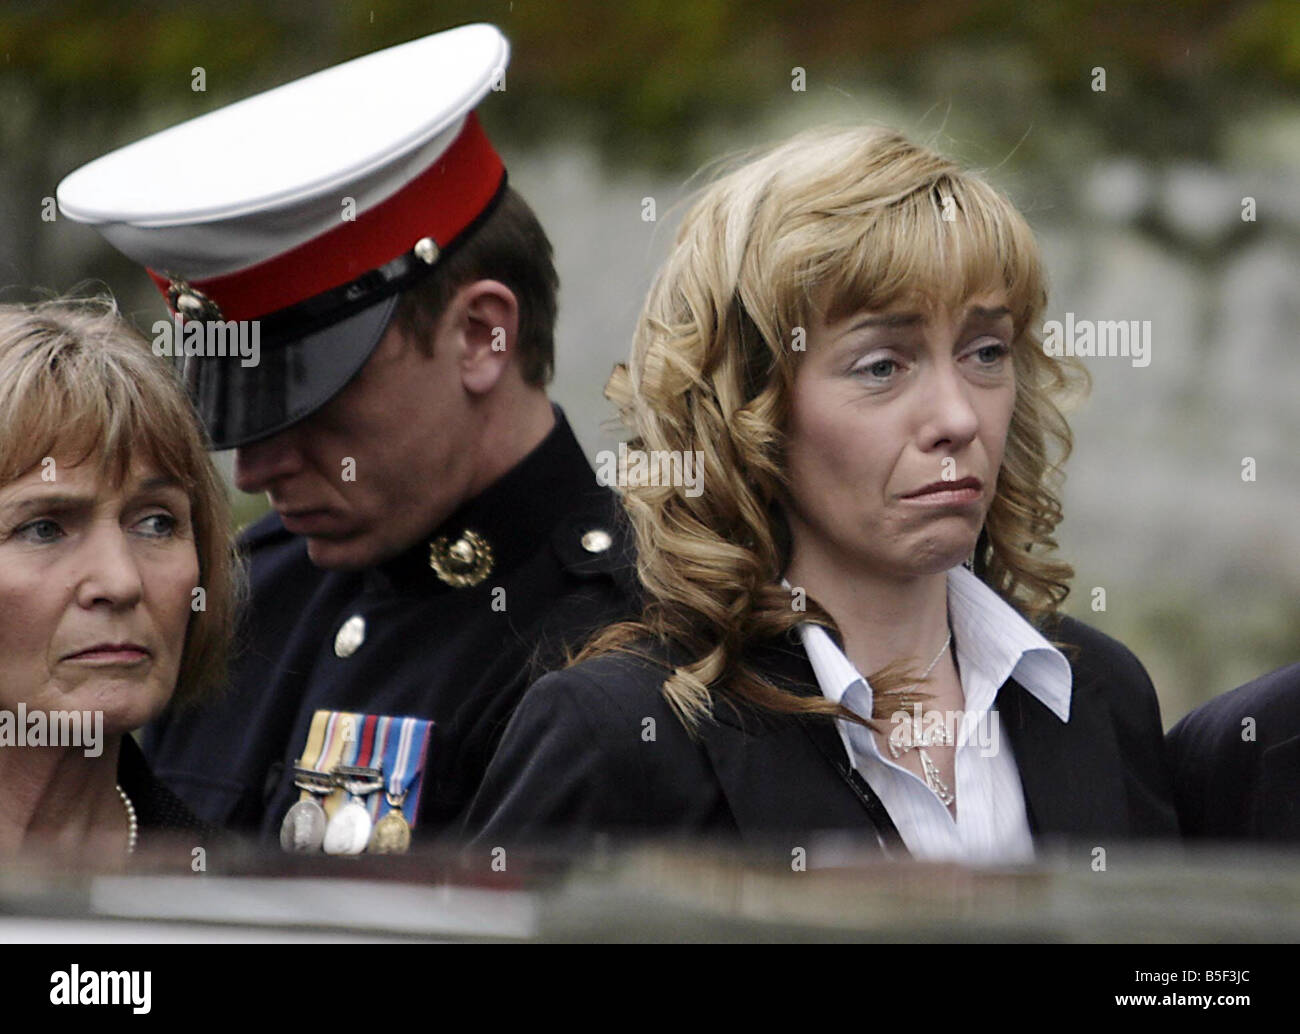 Funeral of Royal Marine Cpl Damian Mulvihill 32 was mourned by 600 yesterday led by fiancee Lisa Fichett 31 at a funeral with full military honours in his home city of Plymouth Cpl Mulvihill was killed by a bomb in Afghanistan last month 05 03 08 Stock Photo